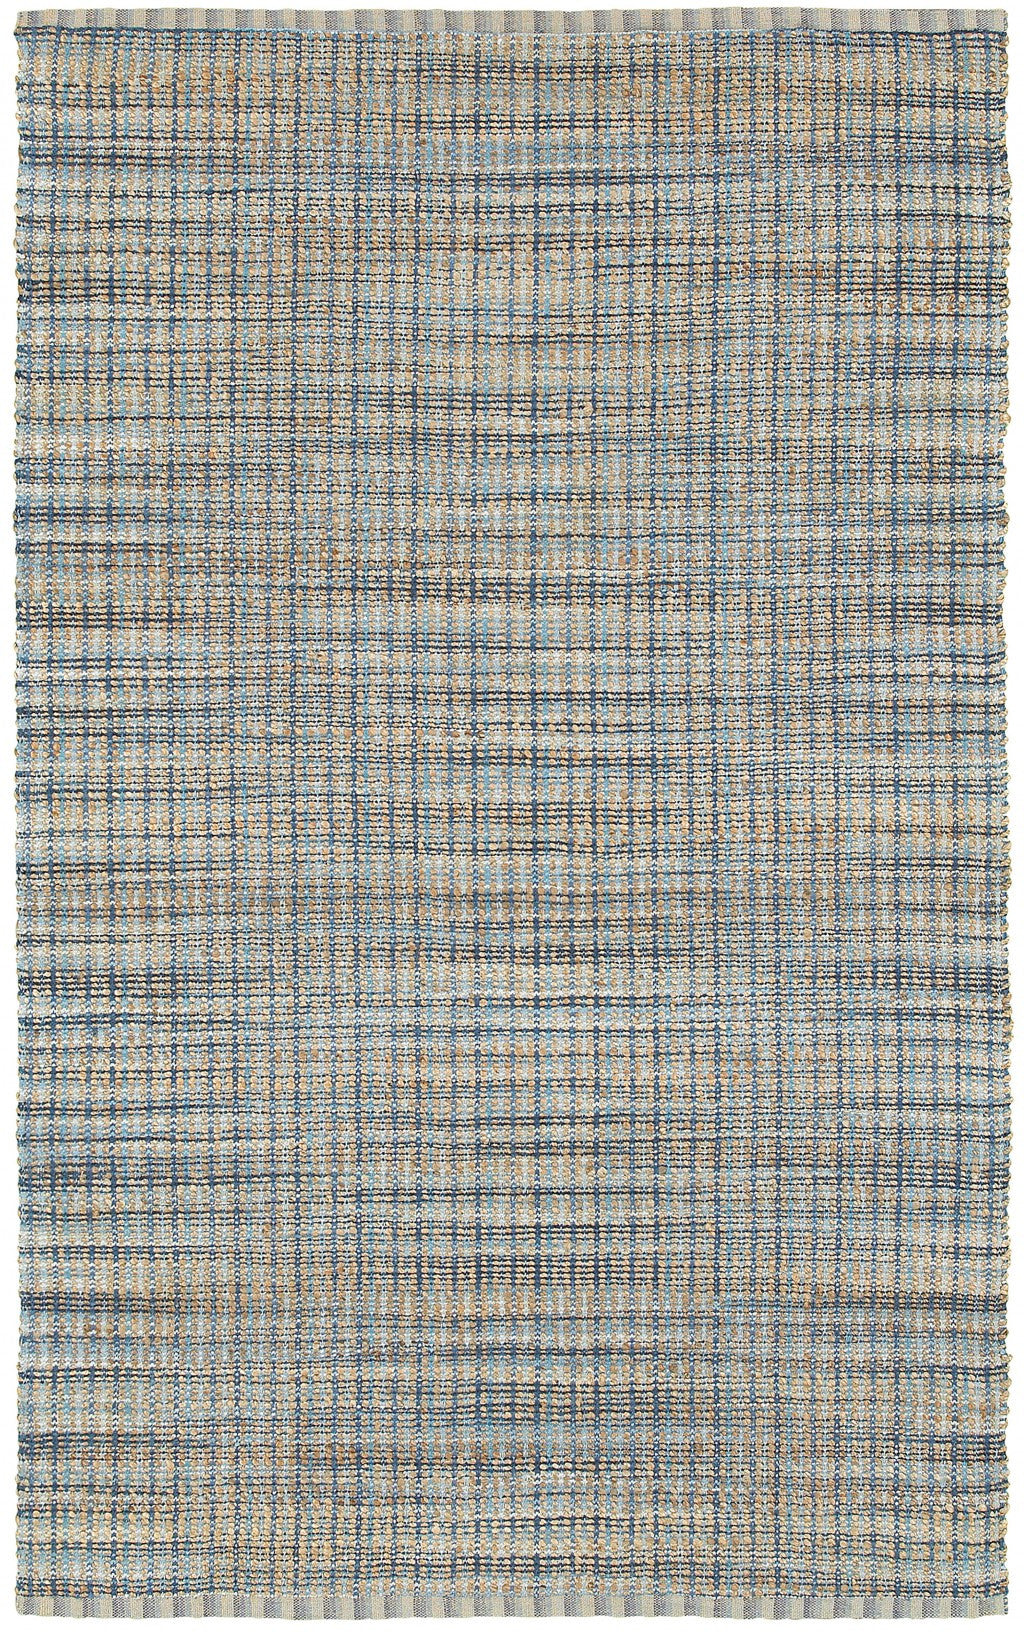 5' x 8' Blue and Ivory Hand Woven Area Rug